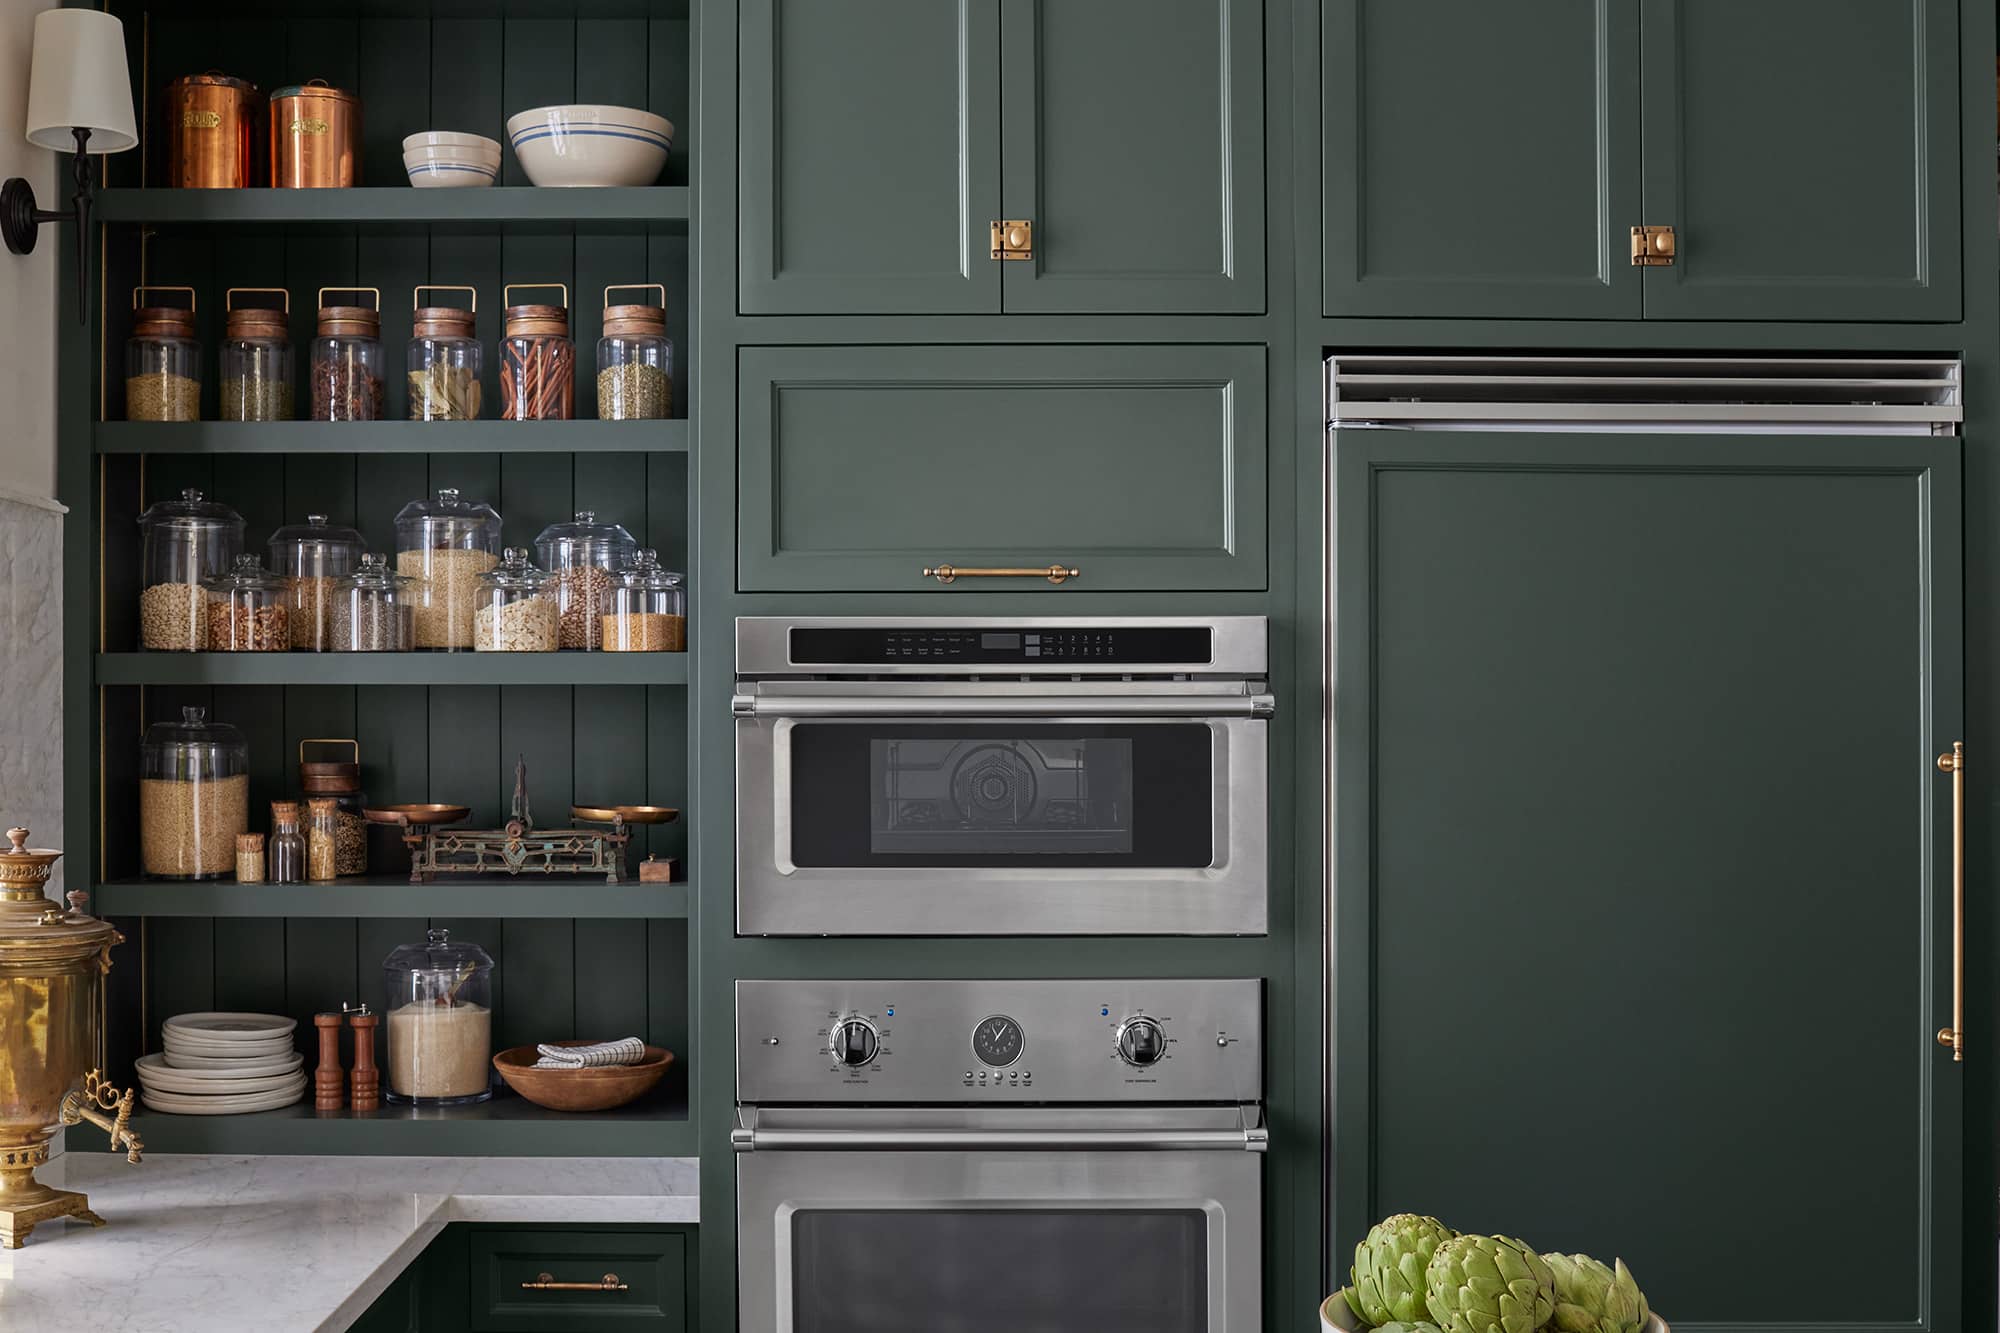 What Are the Benefits of Having Cabinets in a Butler’s Pantry?